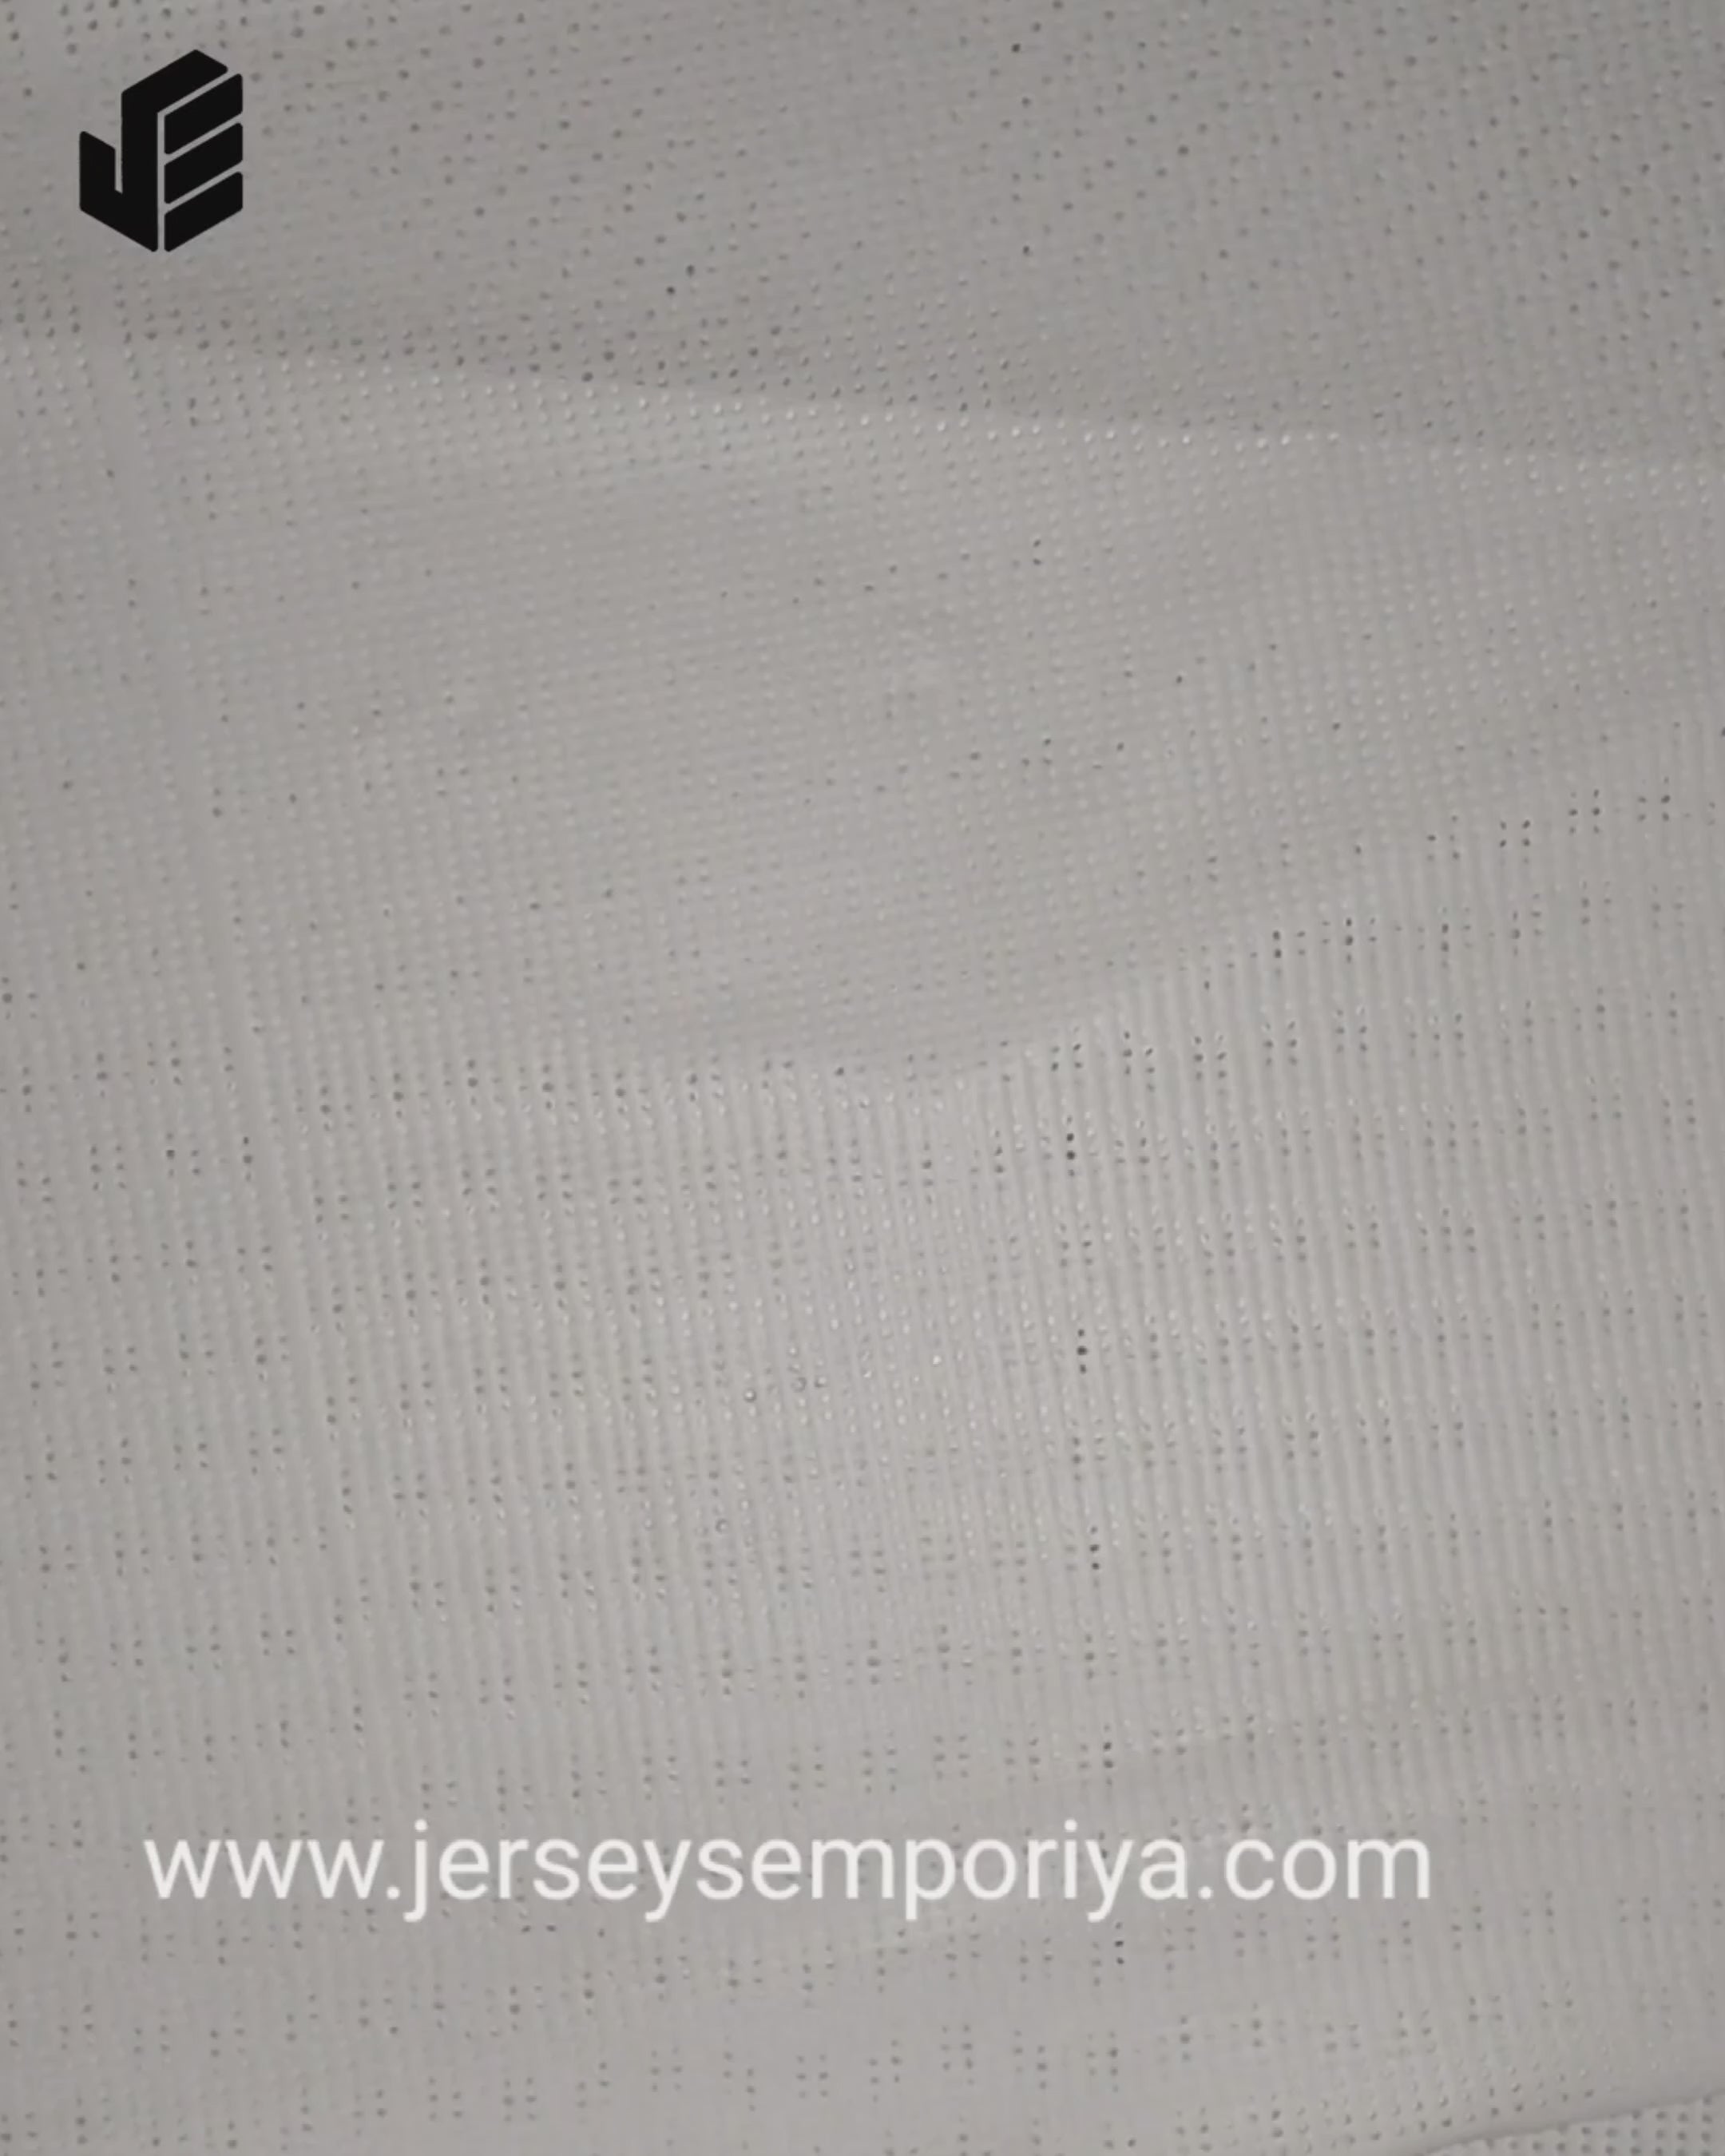 Load video: jerseys emporia courier Packaging video